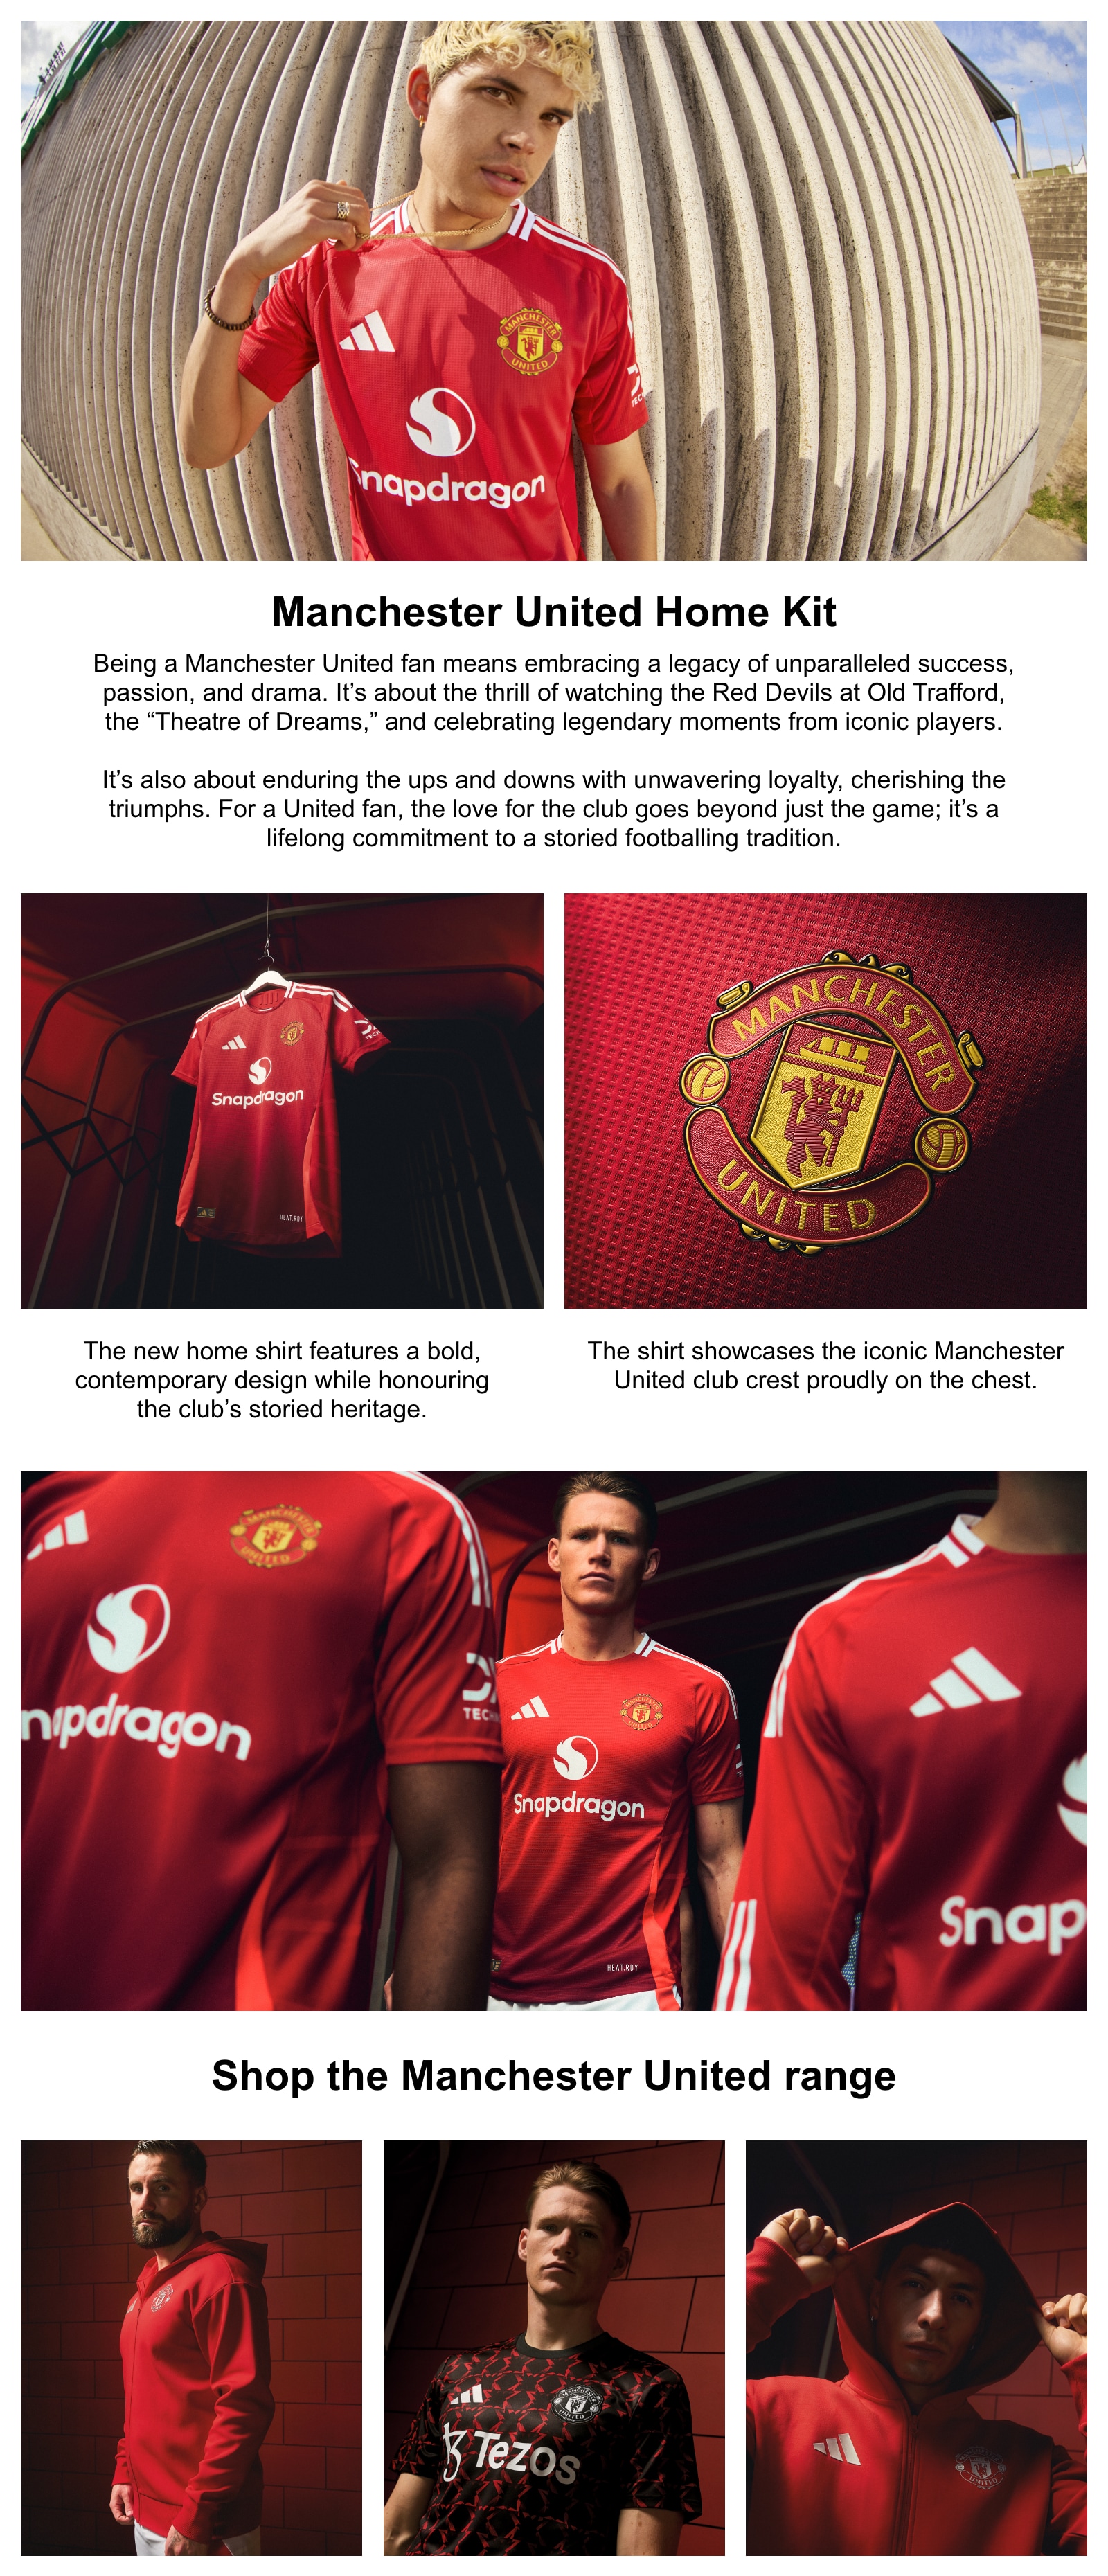 Manchester United Home Kit. Being a Manchester United fan means embracing a legacy of unparalleled success, passion, and drama. It's about the thrill of watching the Red Devils at Old Trafford, the Theatre of Dreams, and celebrating legendary moments from iconic players. It's also about enduring the ups and downs with unwavering loyalty, cherishing the triumphs. For a United fan, the love for the club goes beyond just the game; it's a lifelong commitment to a storied footballing tradition. The new shirt features a bold, contemporary design while honouring the club's storied heritage. The shirt showcases the iconic club crest proudly on the chest.